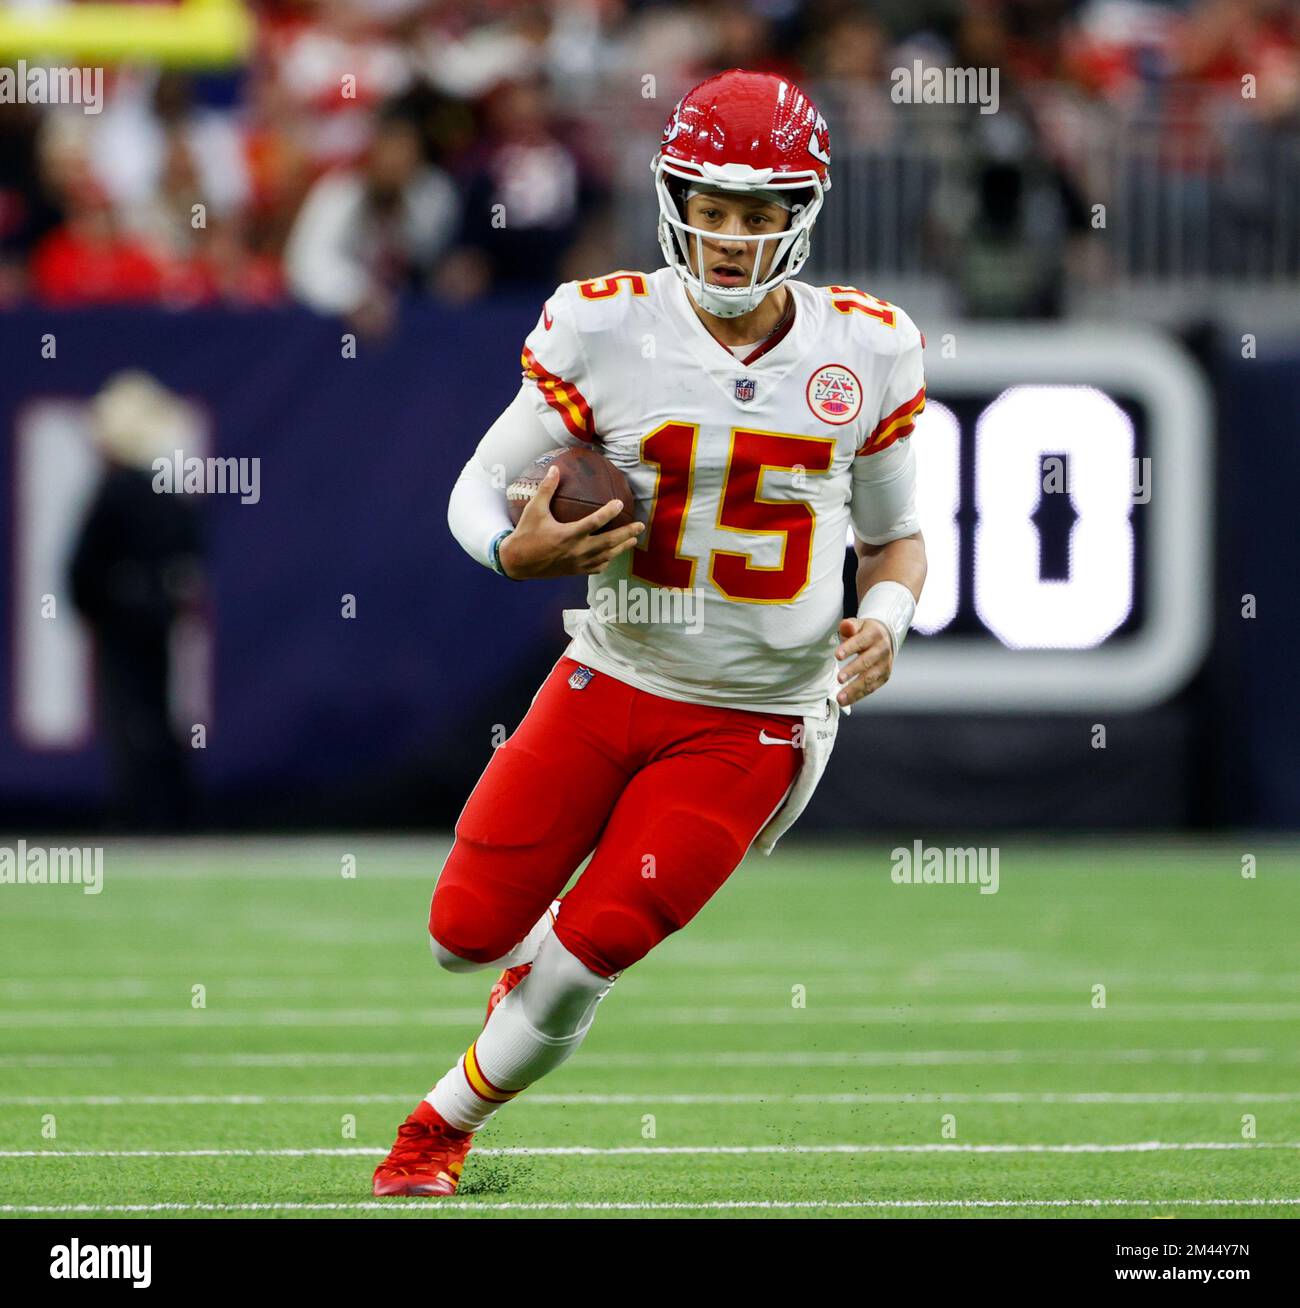 December 18, 2022: Kansas City Chiefs quarterback Patrick Mahomes (15)  carries the ball to set up a potential game-winning field goal near the end  of regulation in an NFL game between the